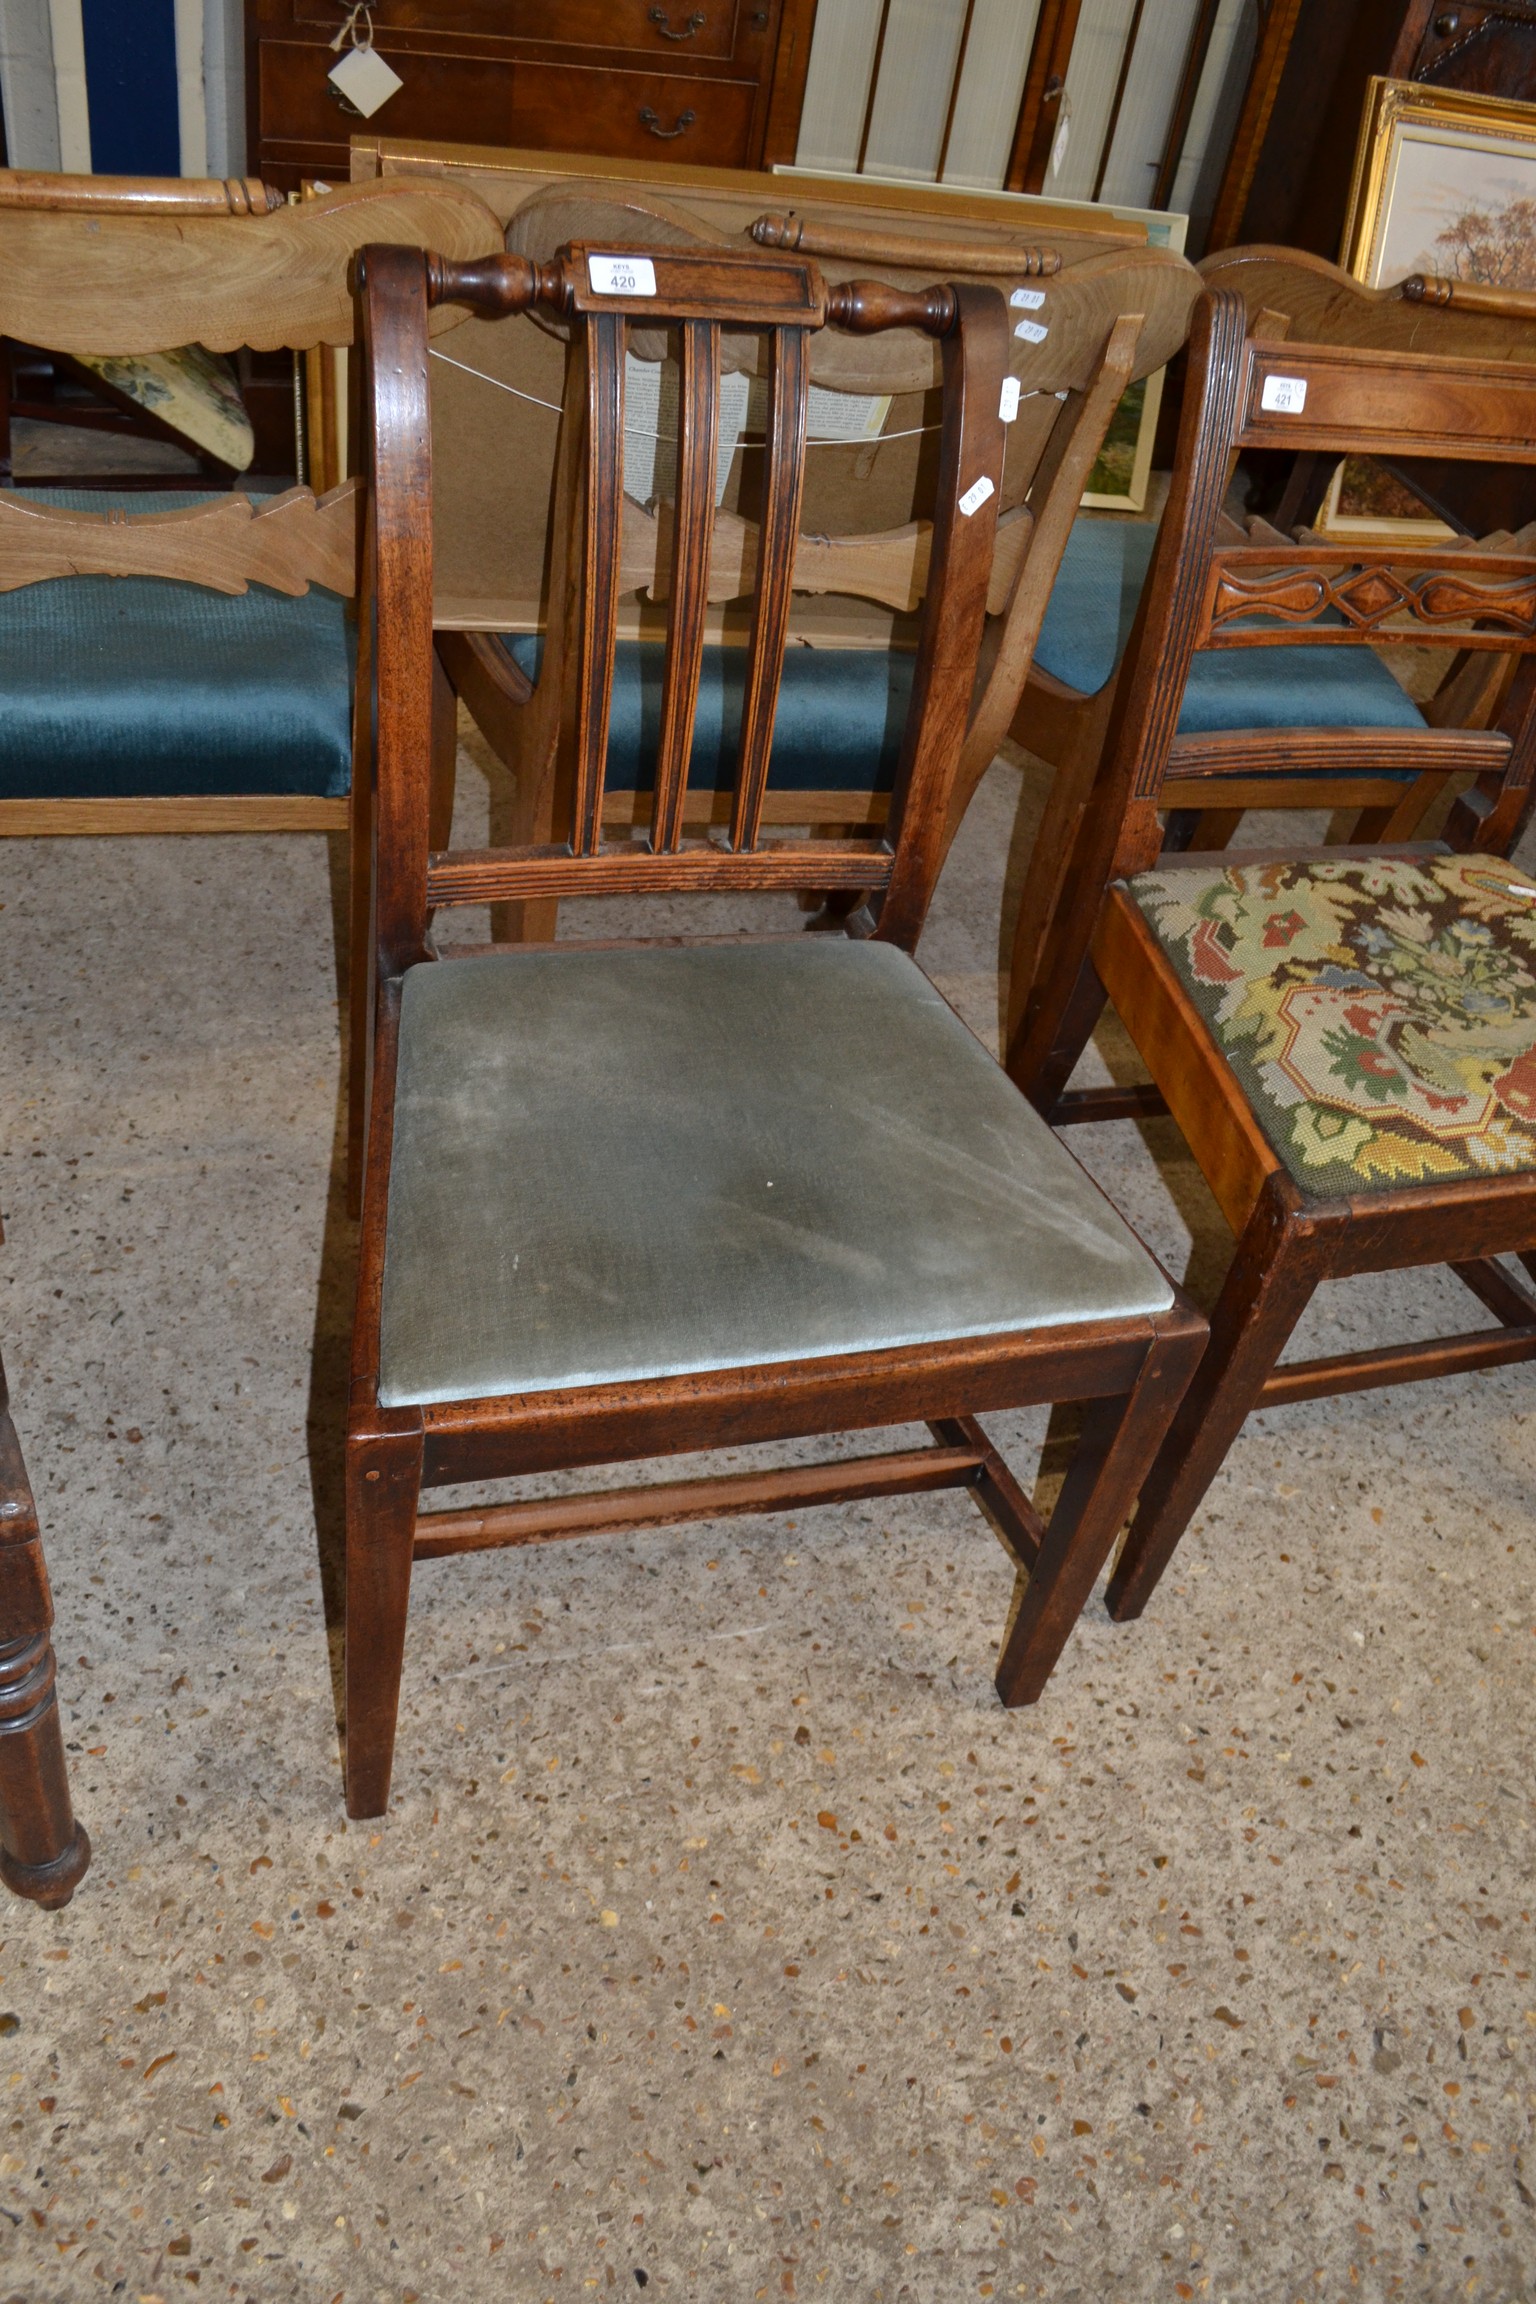 SINGLE 19TH CENTURY MAHOGANY BAR BACK DINING CHAIR WITH PUSH OUT SEATS